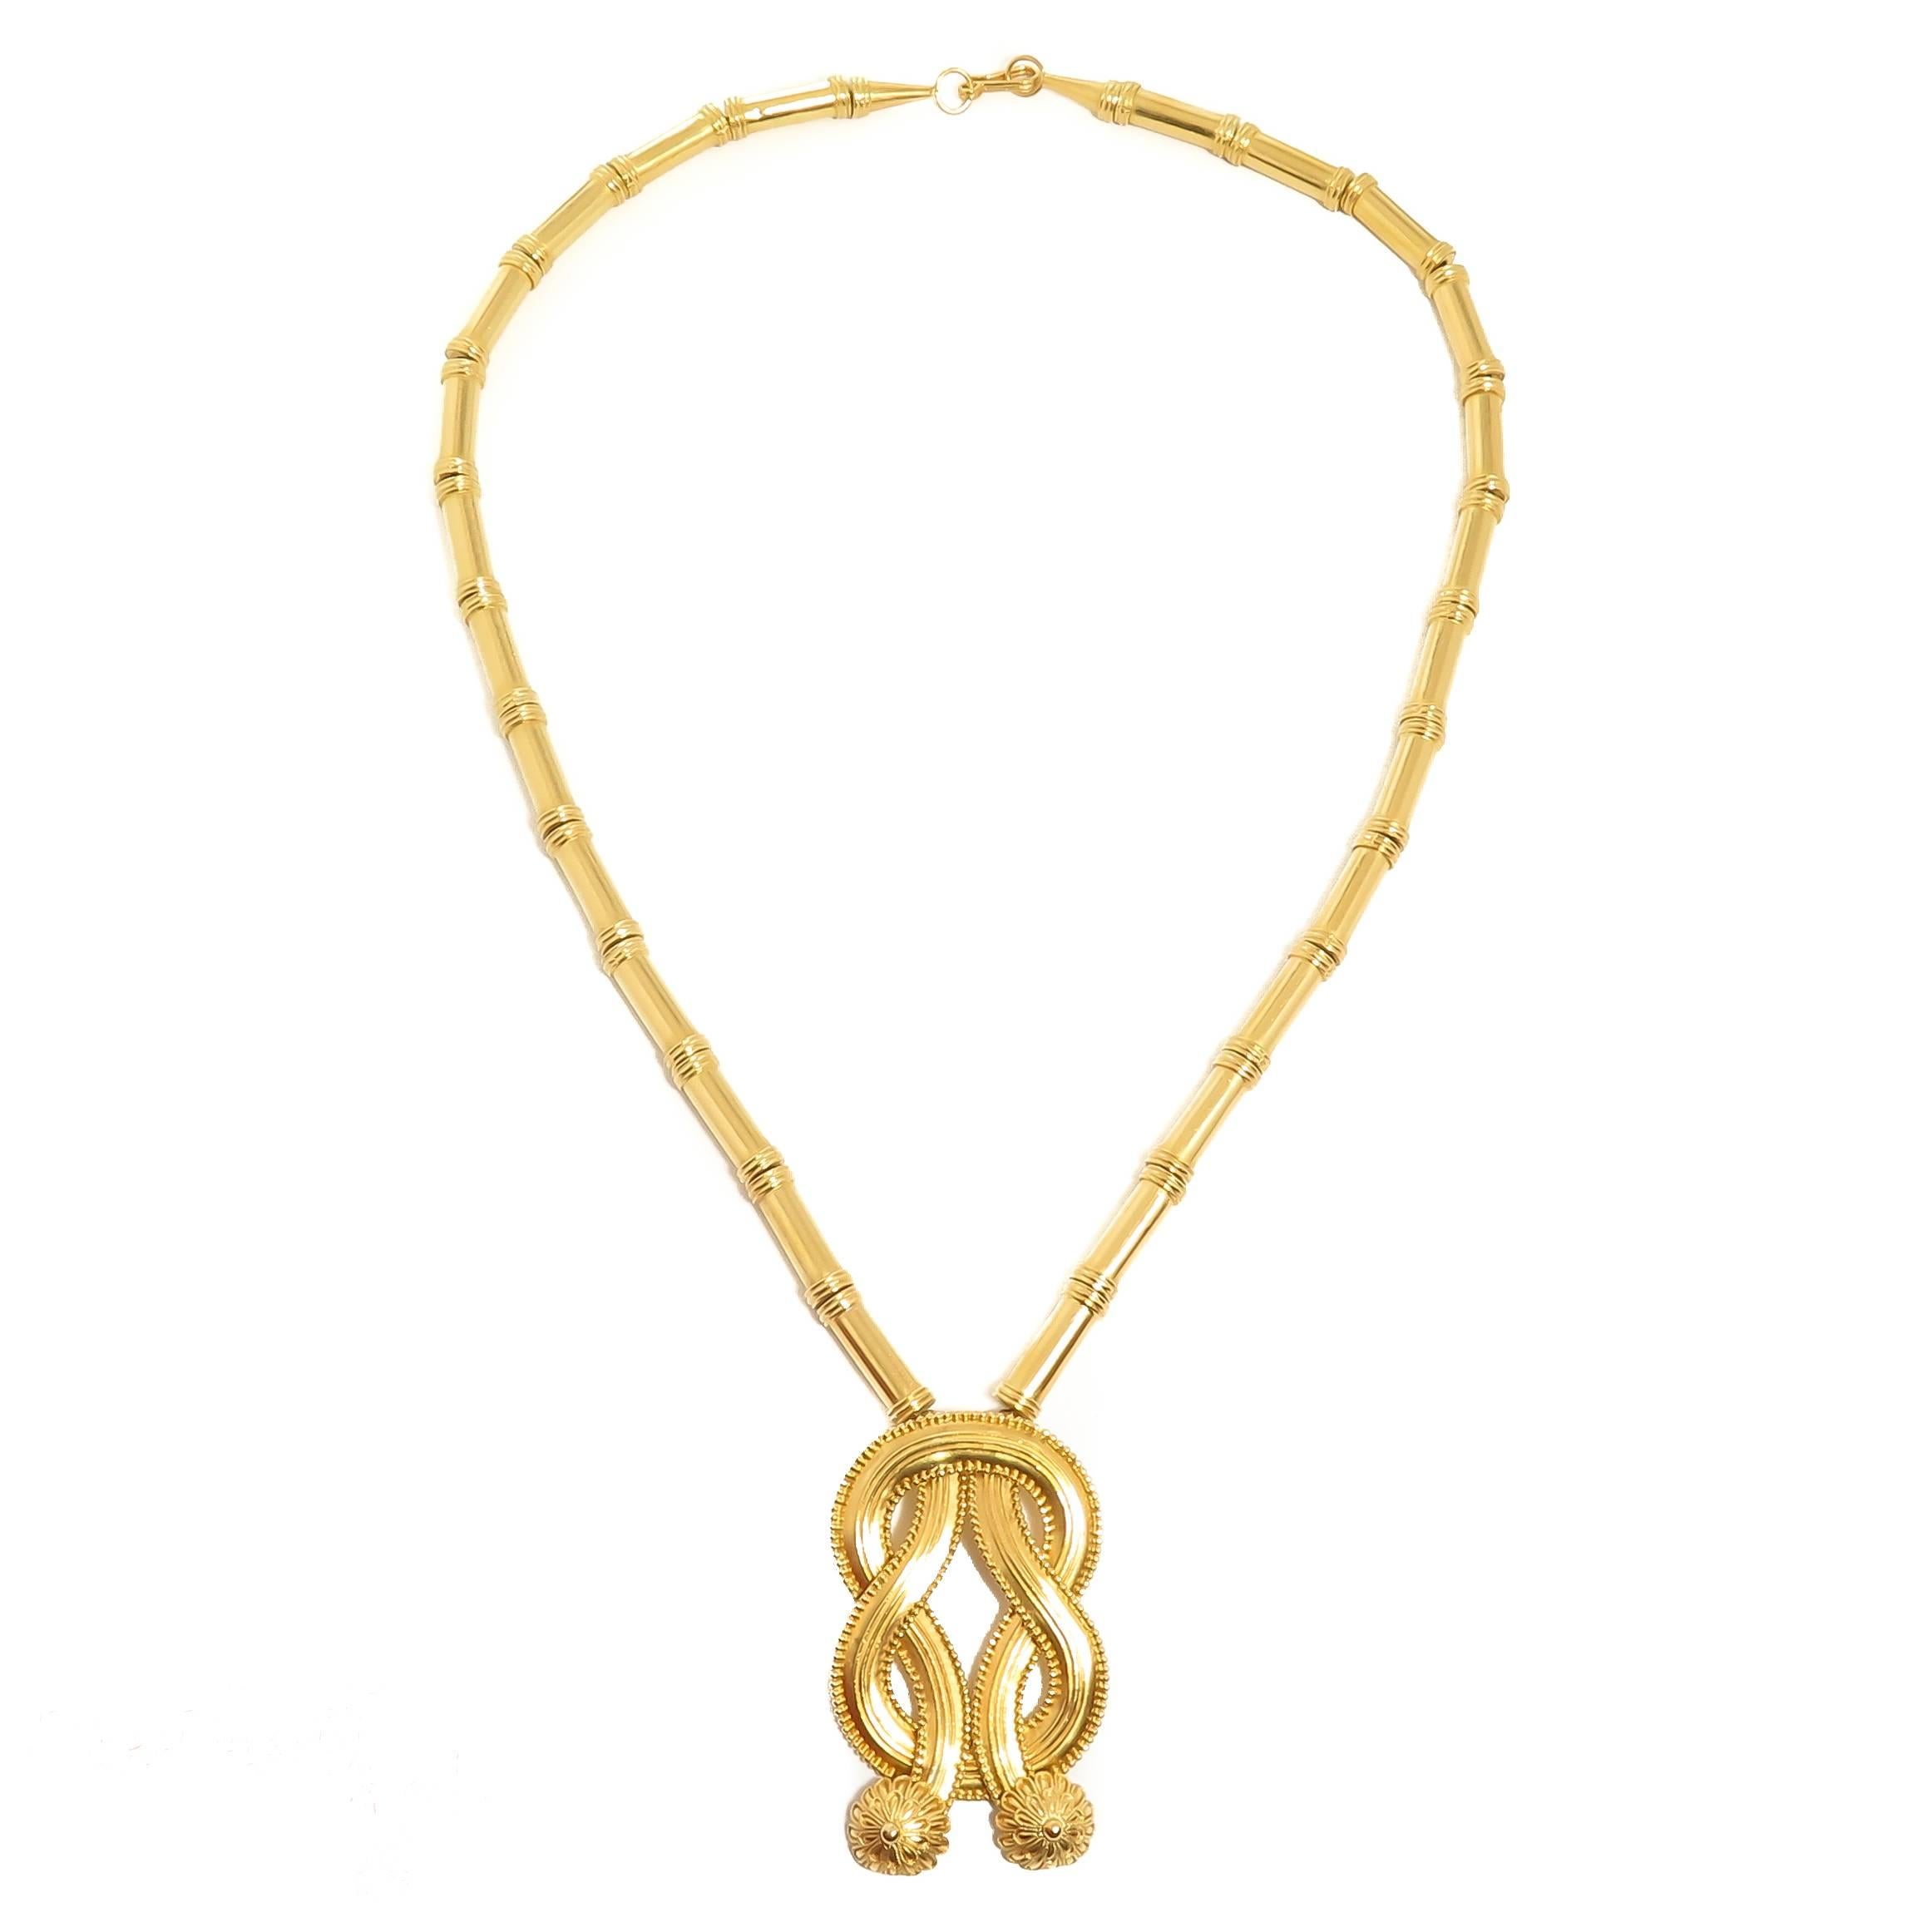 Lalaounis Gold "Knot of Hercules" Necklace